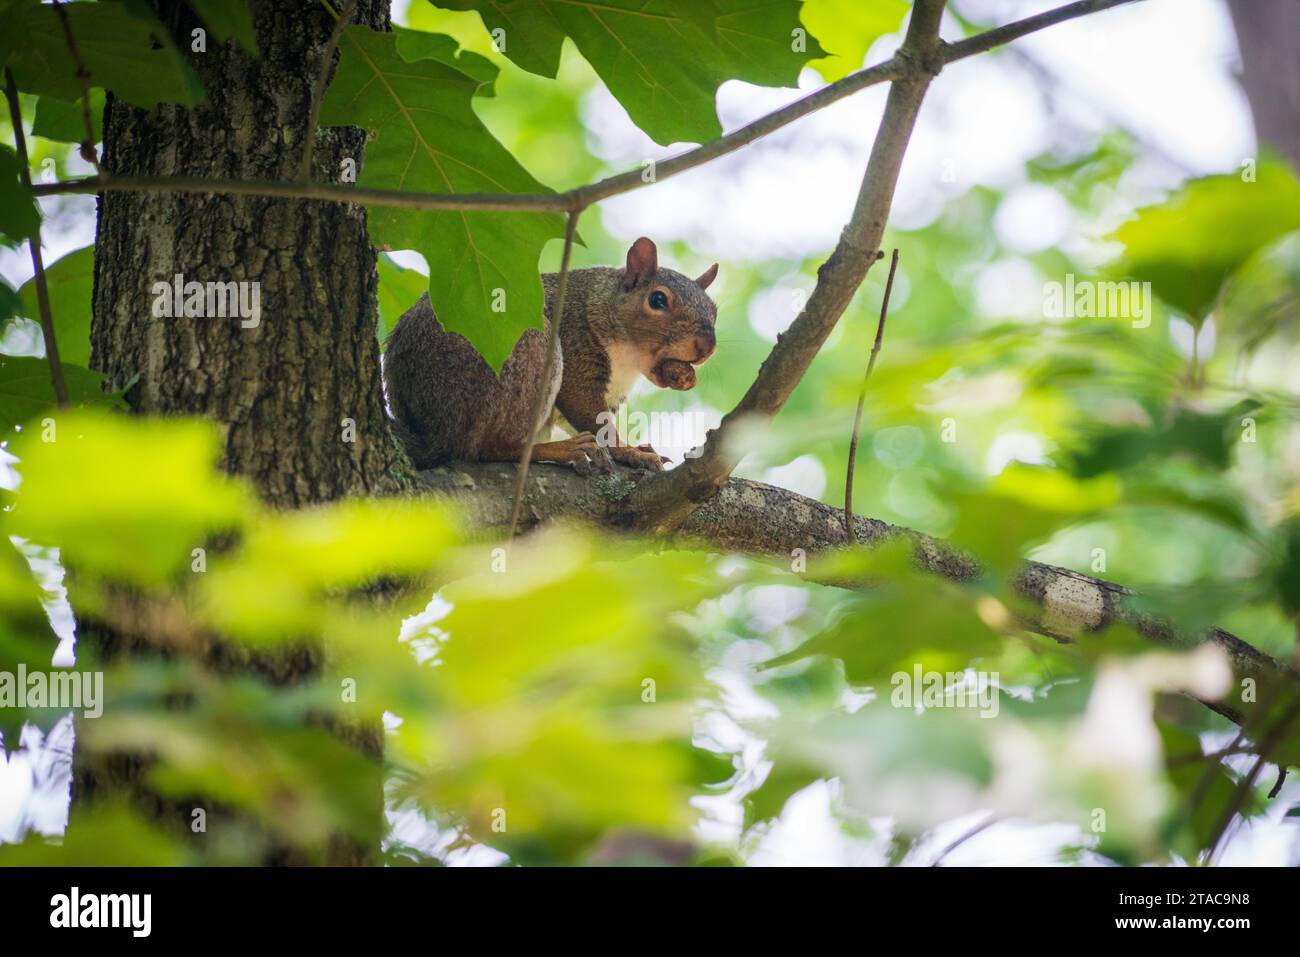 Squirrel in a Tree With a Nut Stock Photo